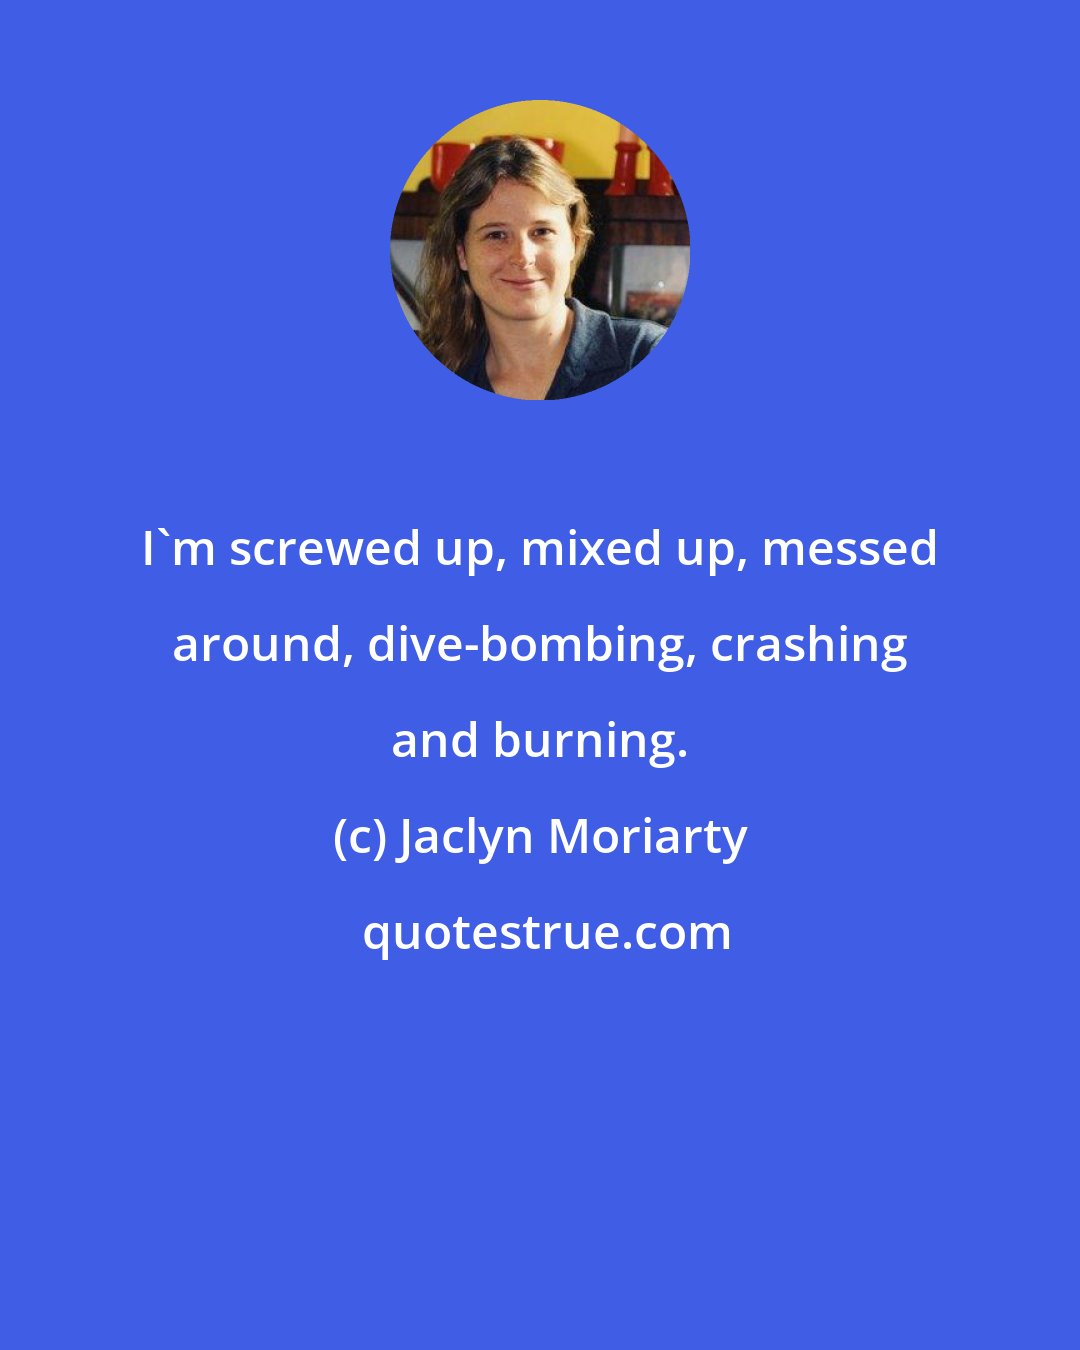 Jaclyn Moriarty: I'm screwed up, mixed up, messed around, dive-bombing, crashing and burning.